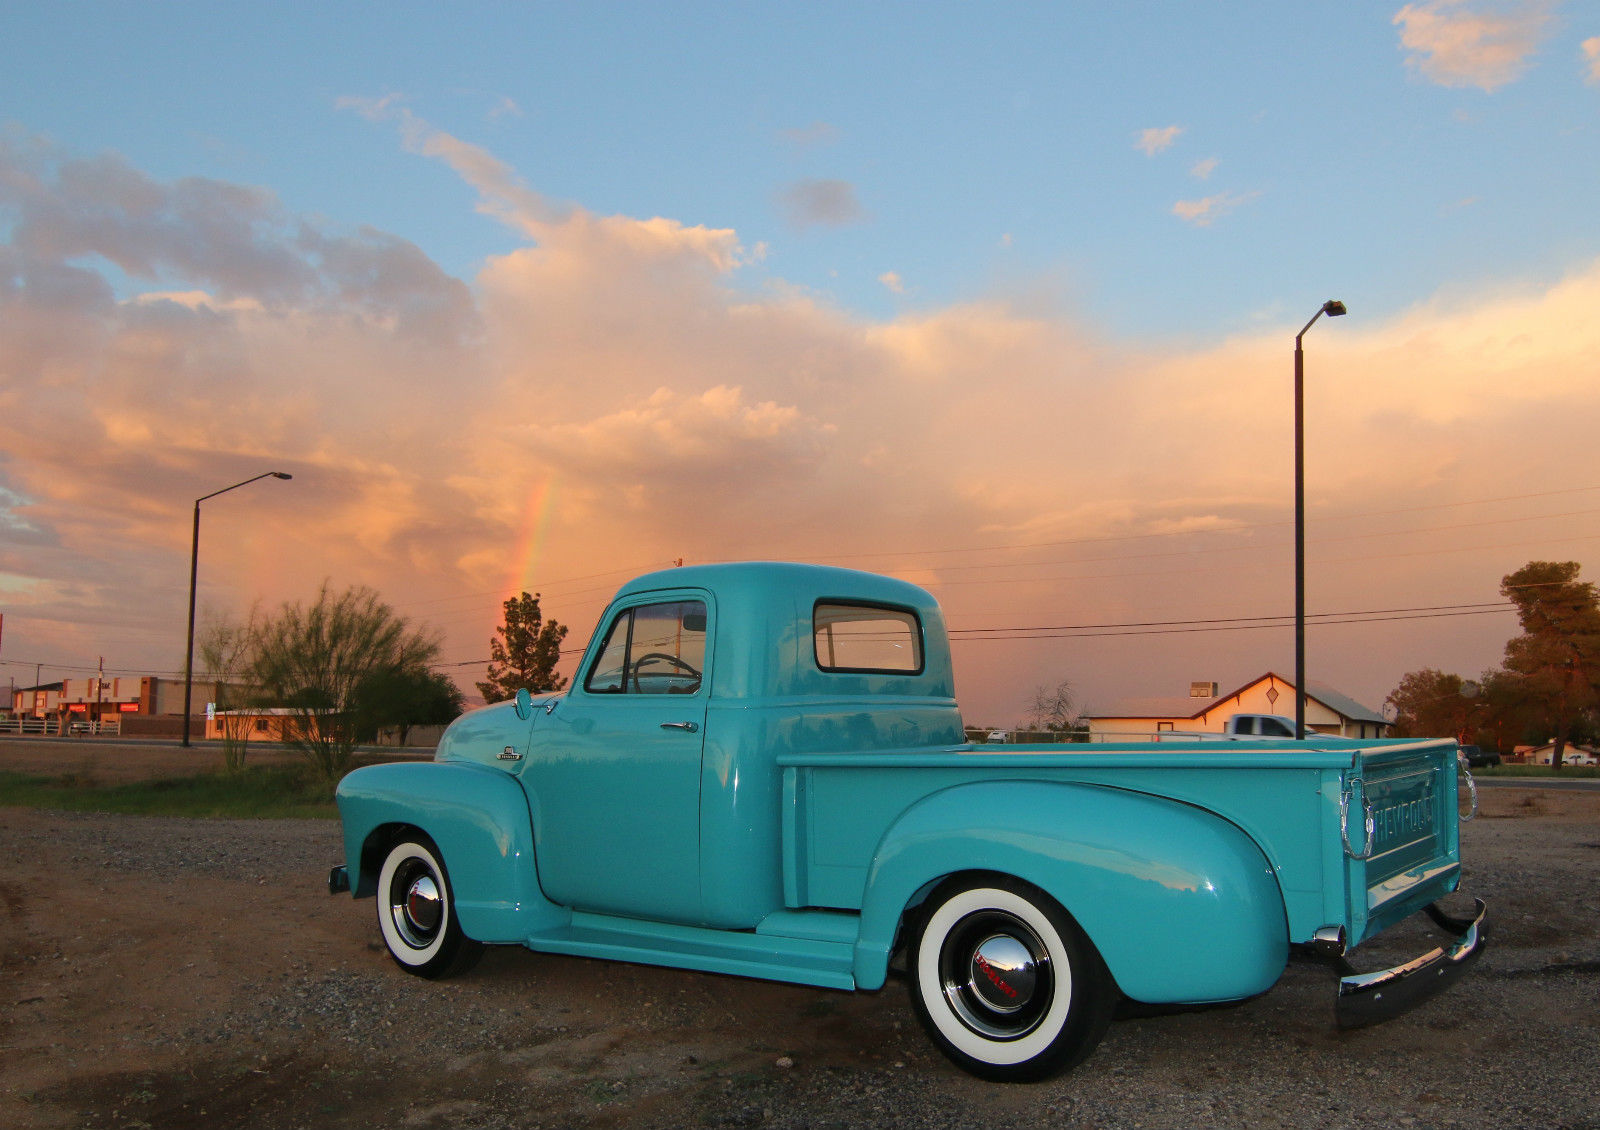 All American Classic Cars: 1955 Chevrolet 3100 Pickup Truck